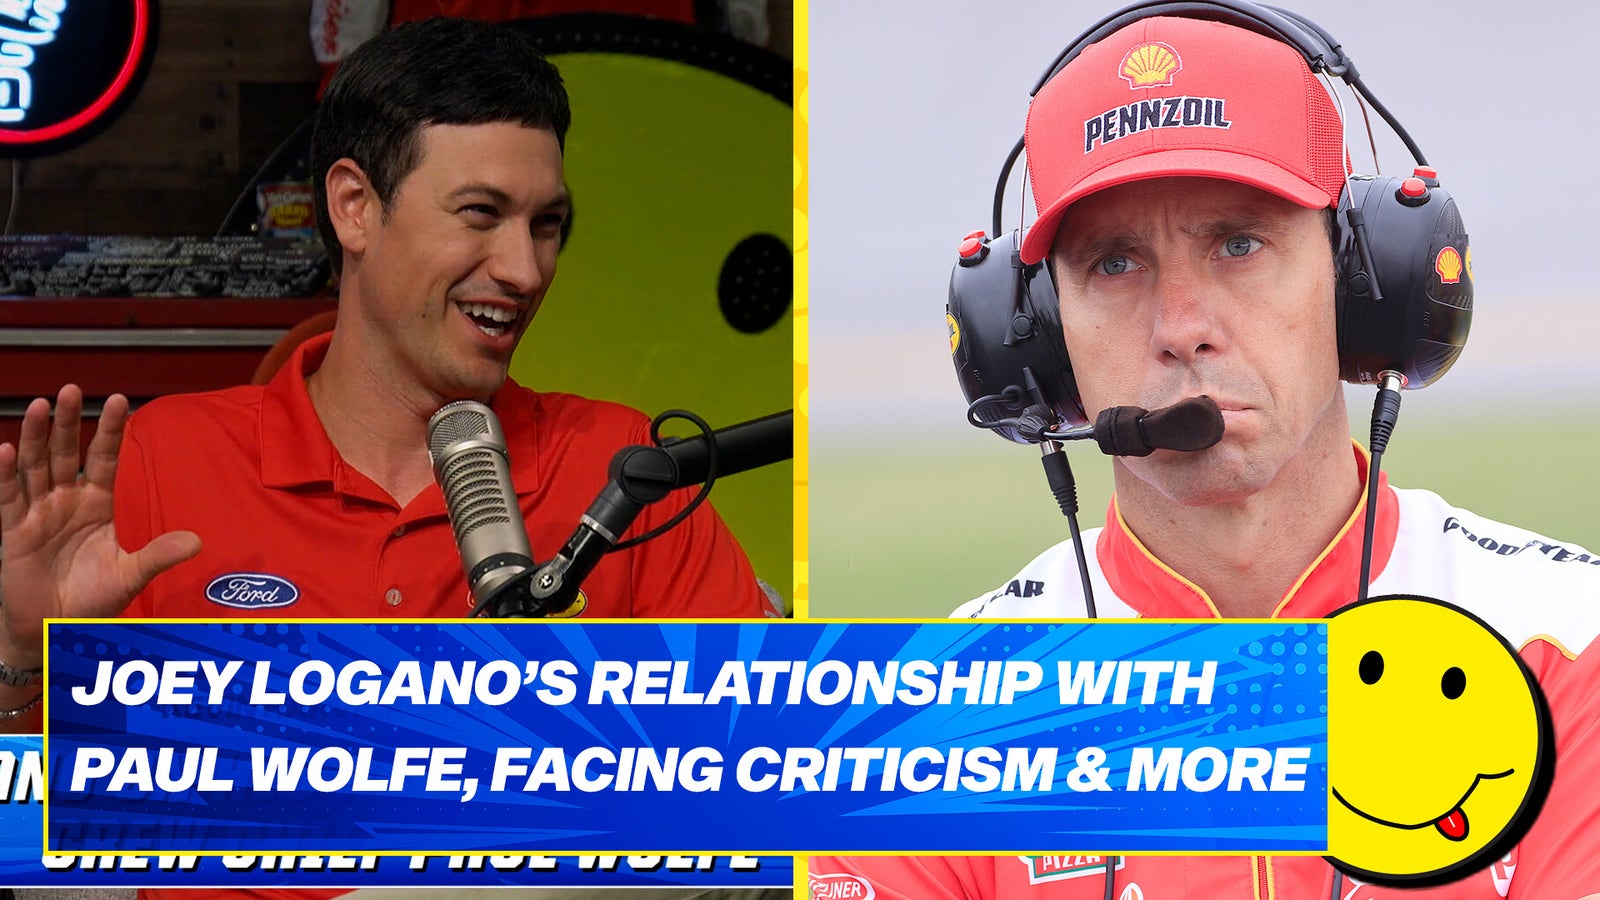 Joey Logano’s relationship with crew chief, handling criticism & more